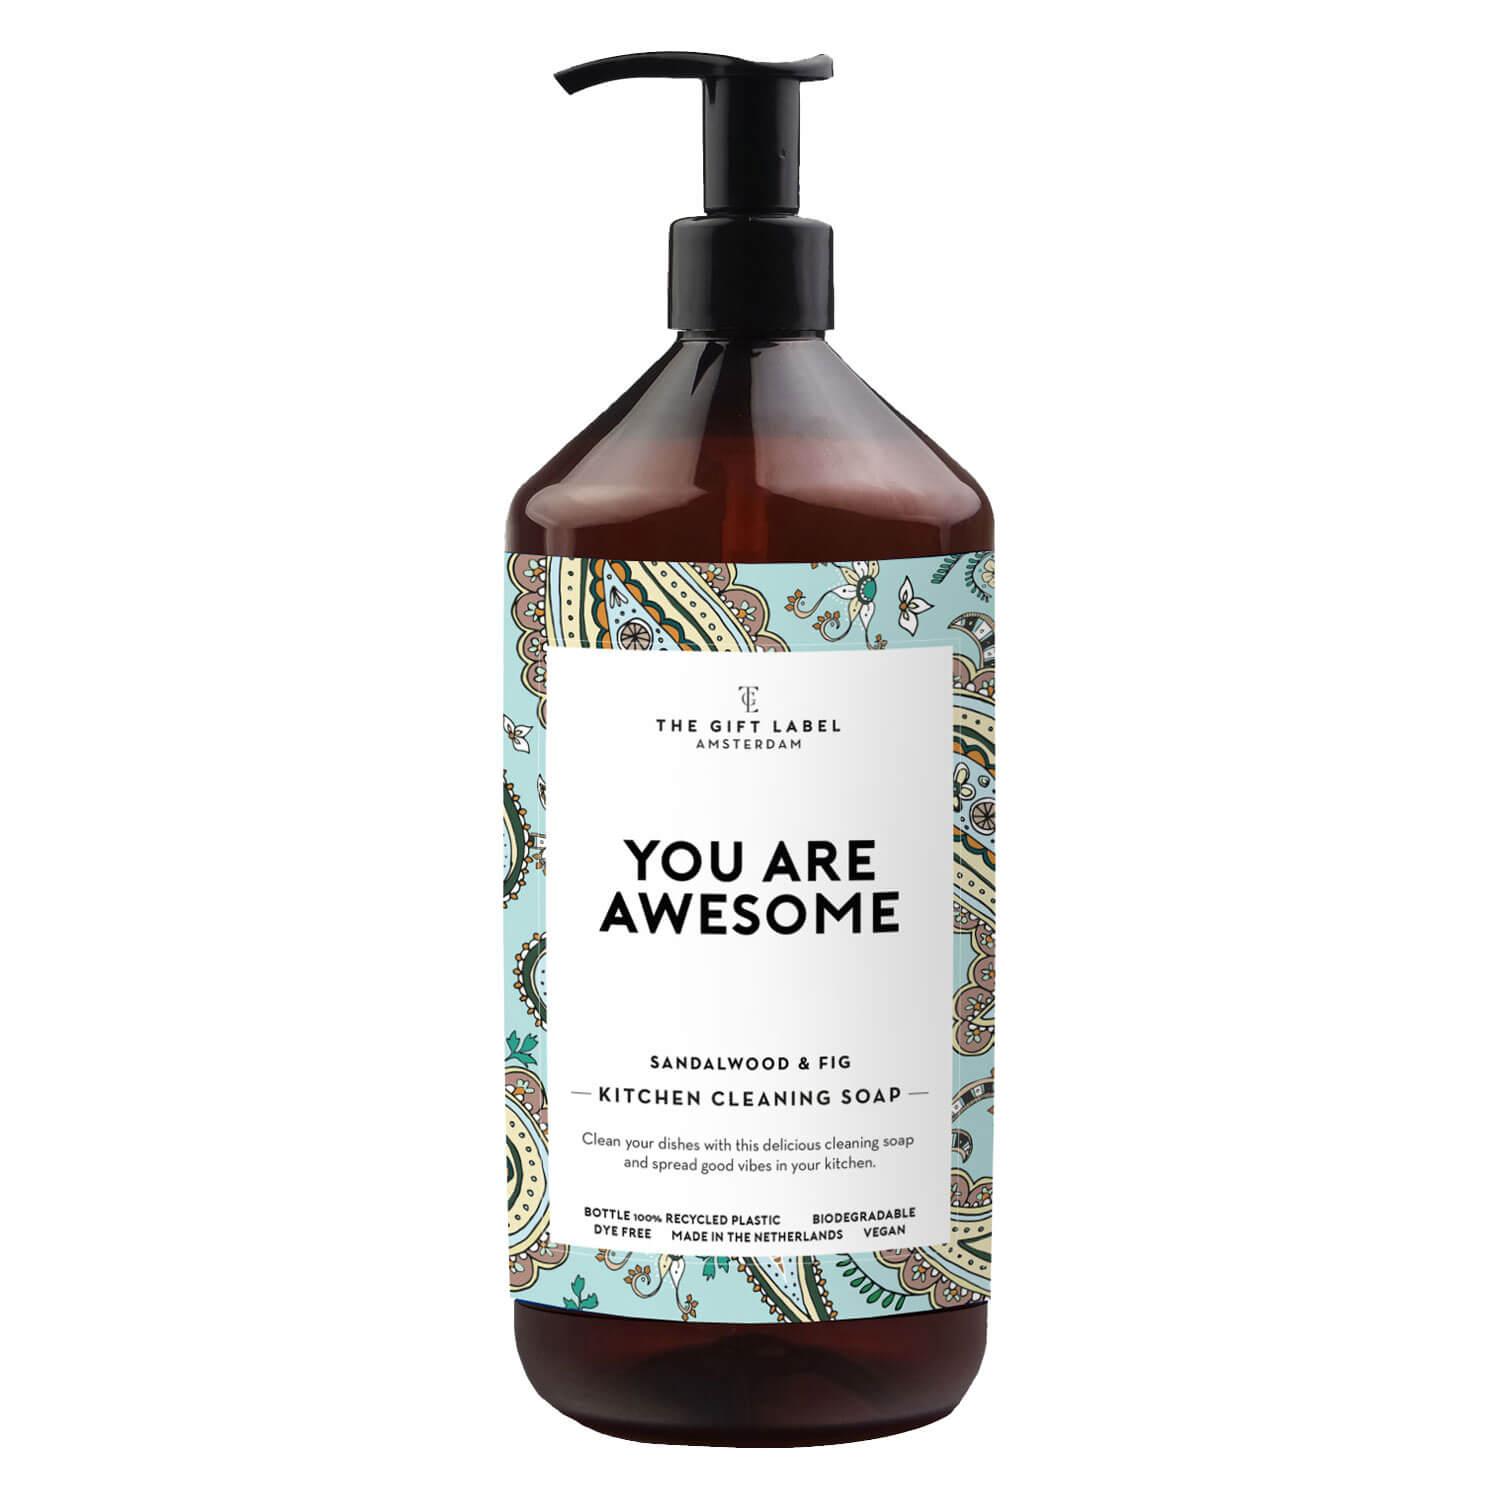 TGL Home - Kitchen Cleaning Soap You Are Awesome